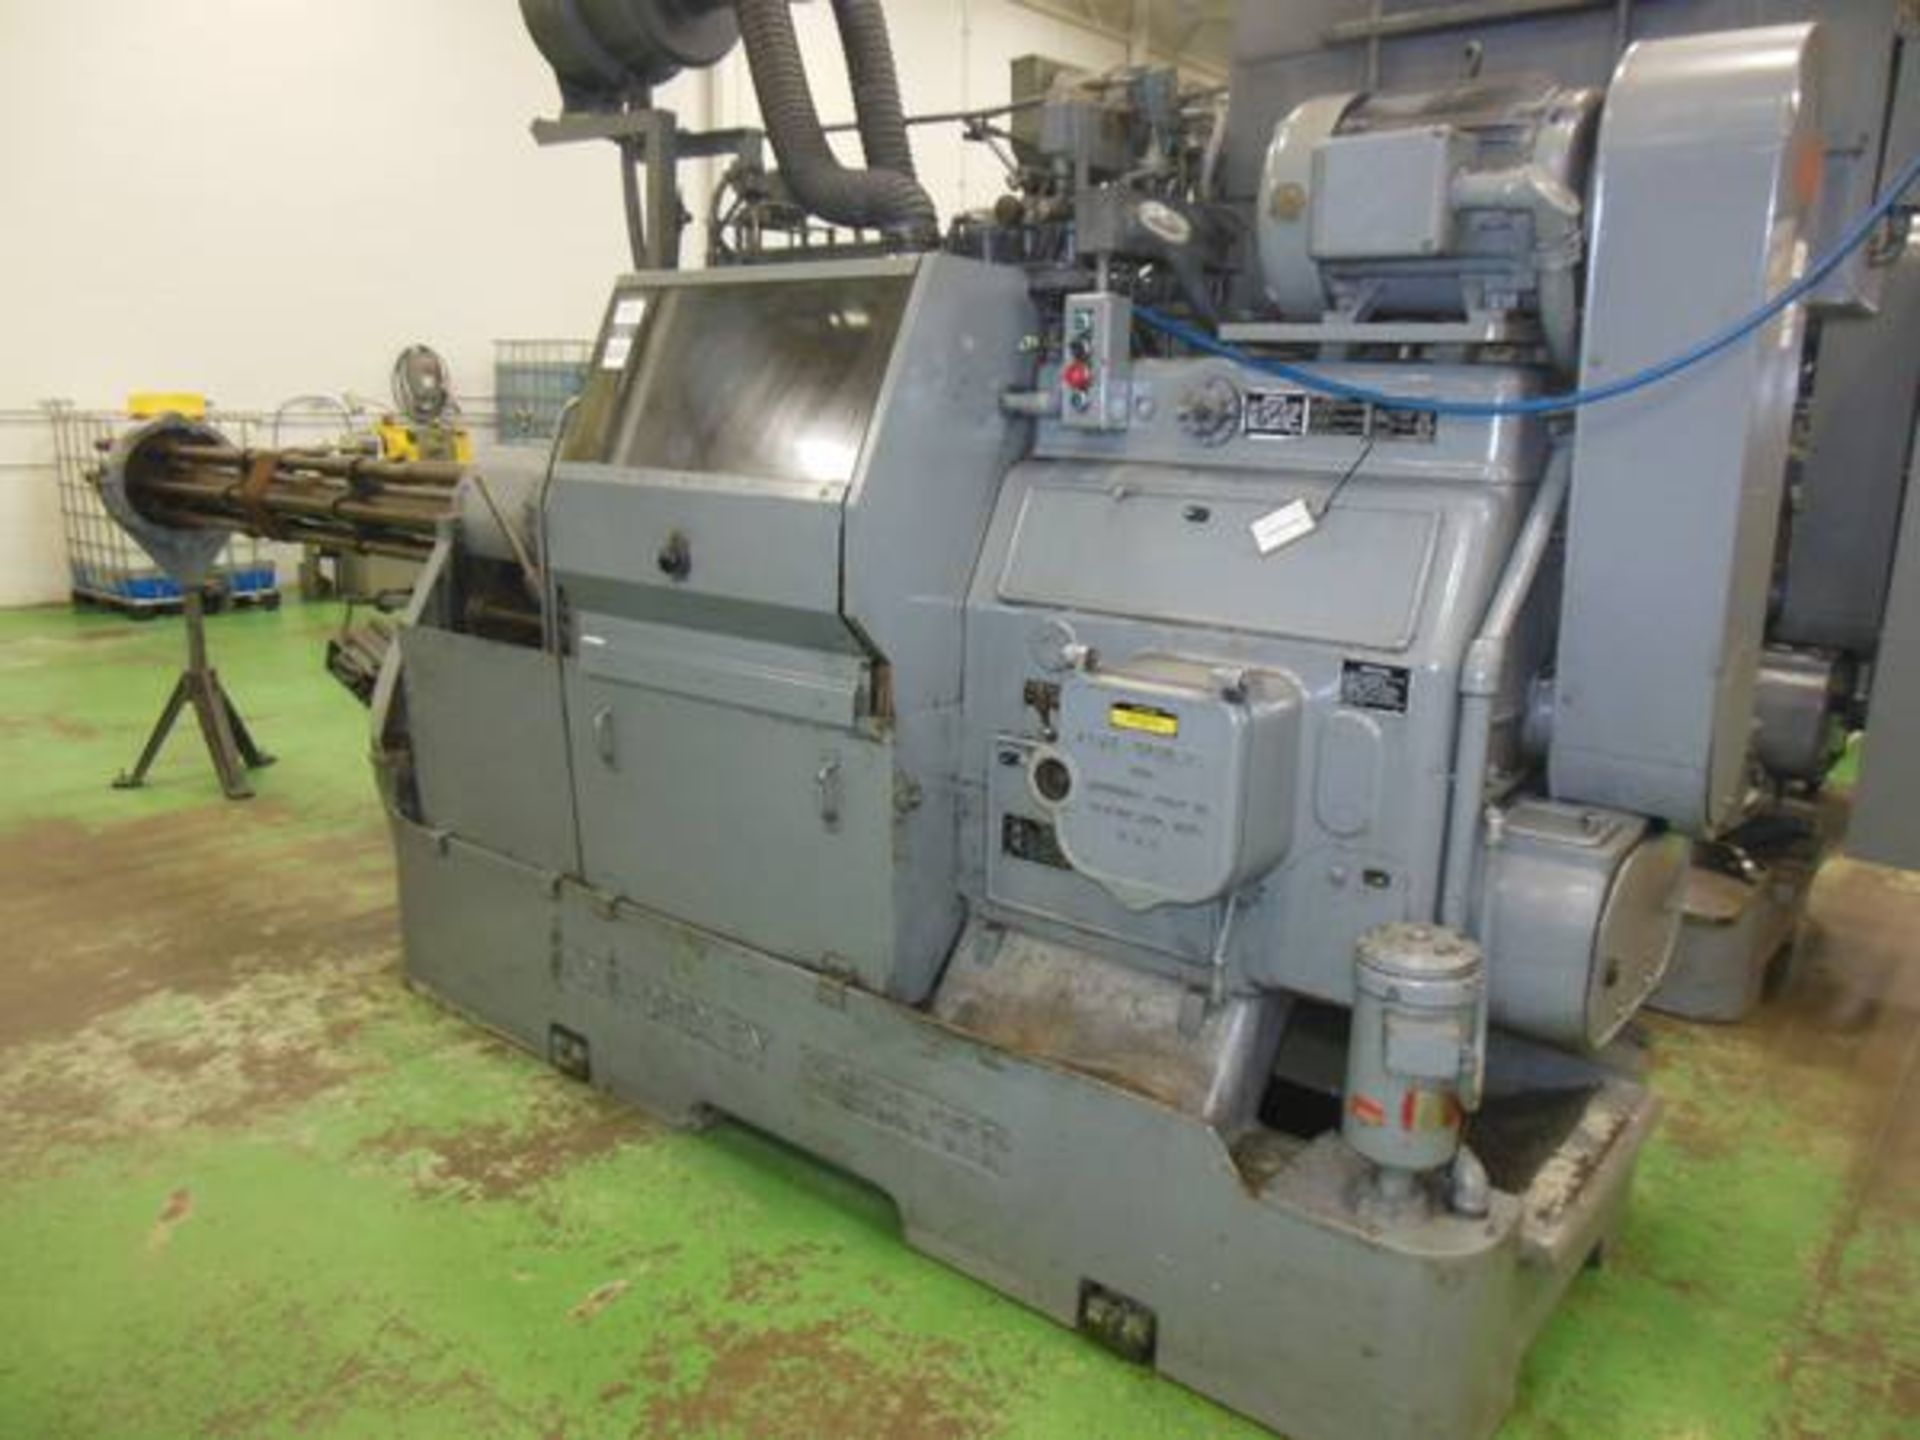 Acme Gridley Model RA-6 1-1/4"  Automatic Screw Machine; Serial Number: 71964-B; with 6-Spindles,